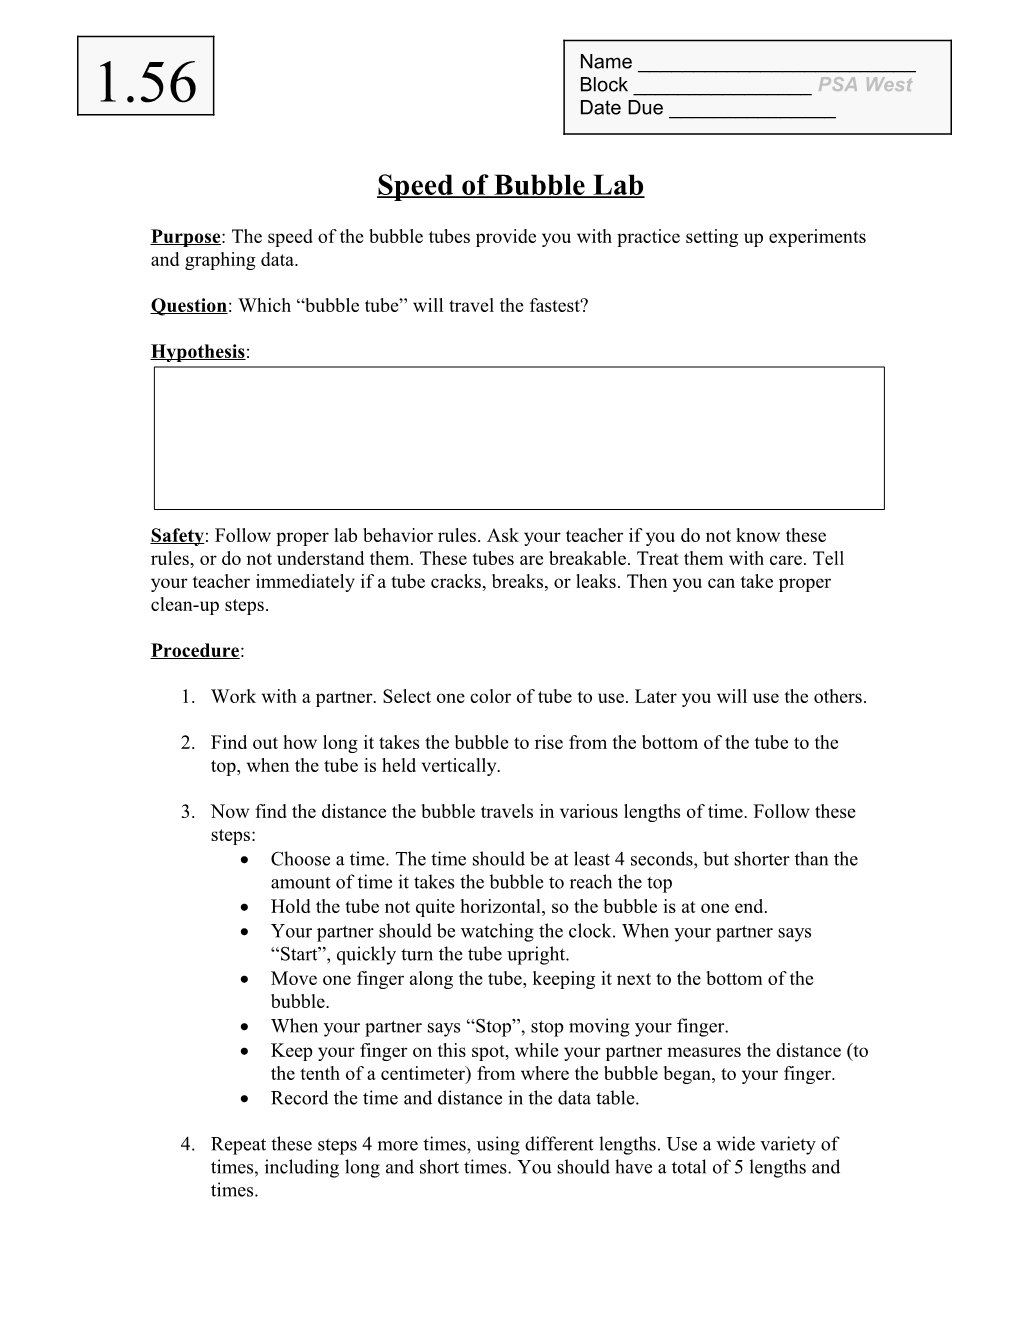 Speed of Bubble Lab